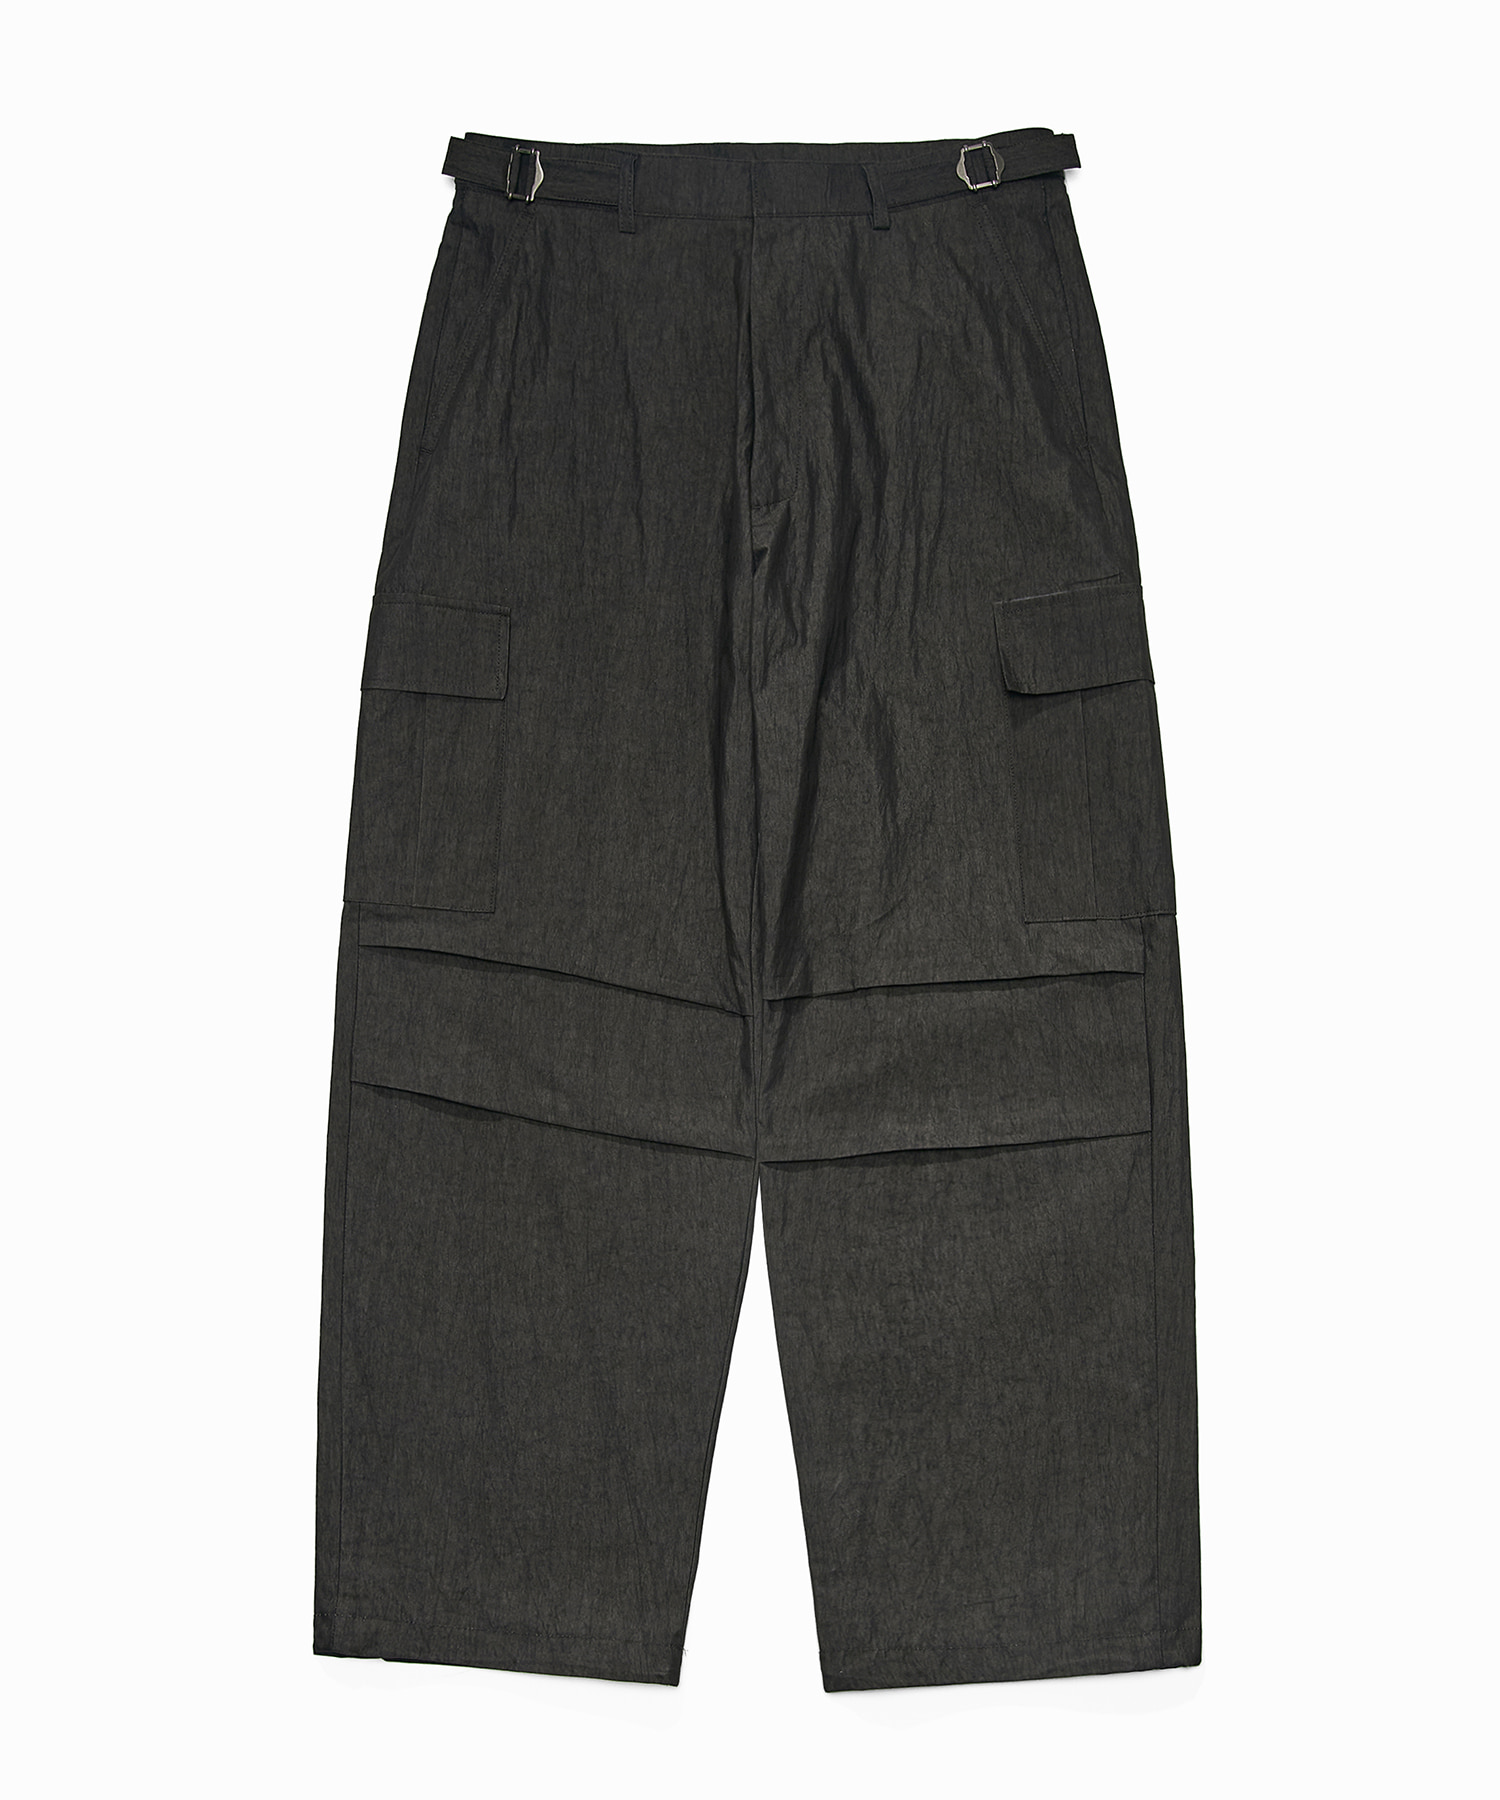 TY office casual sports parachute pants_Black